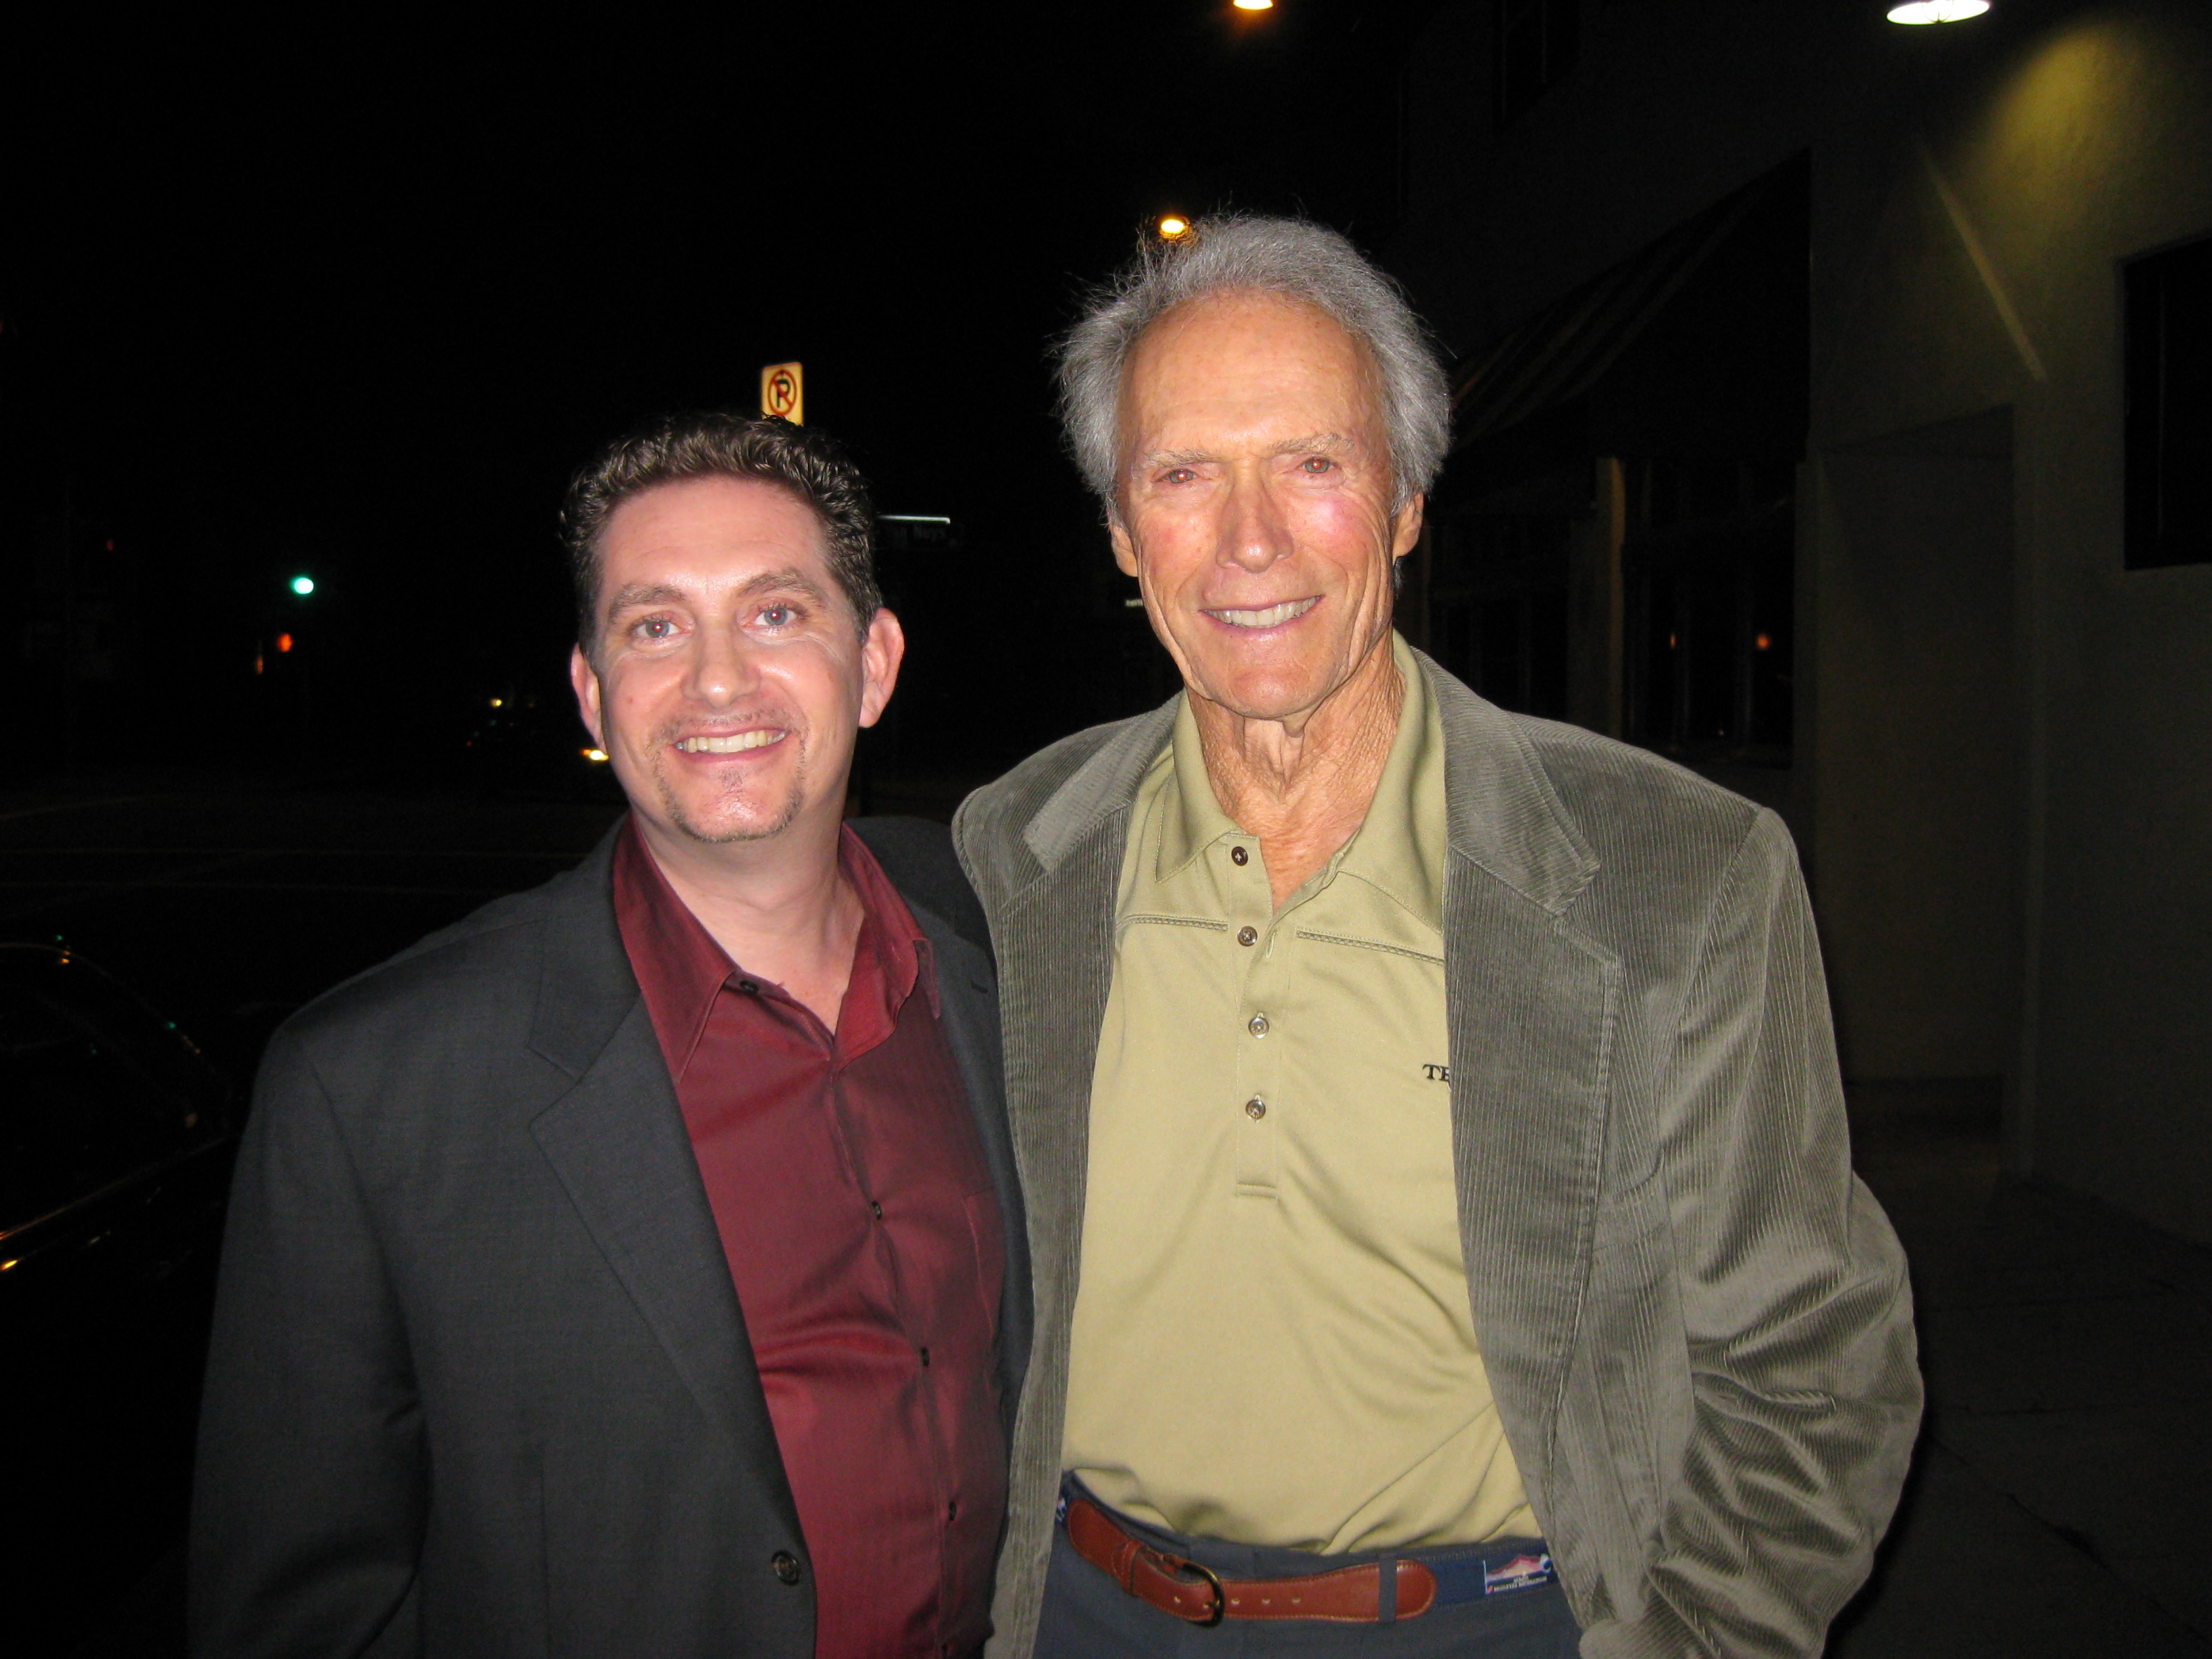 Clint Eastwood and Michael Christaldi leaving a restaurant in Los Angeles.